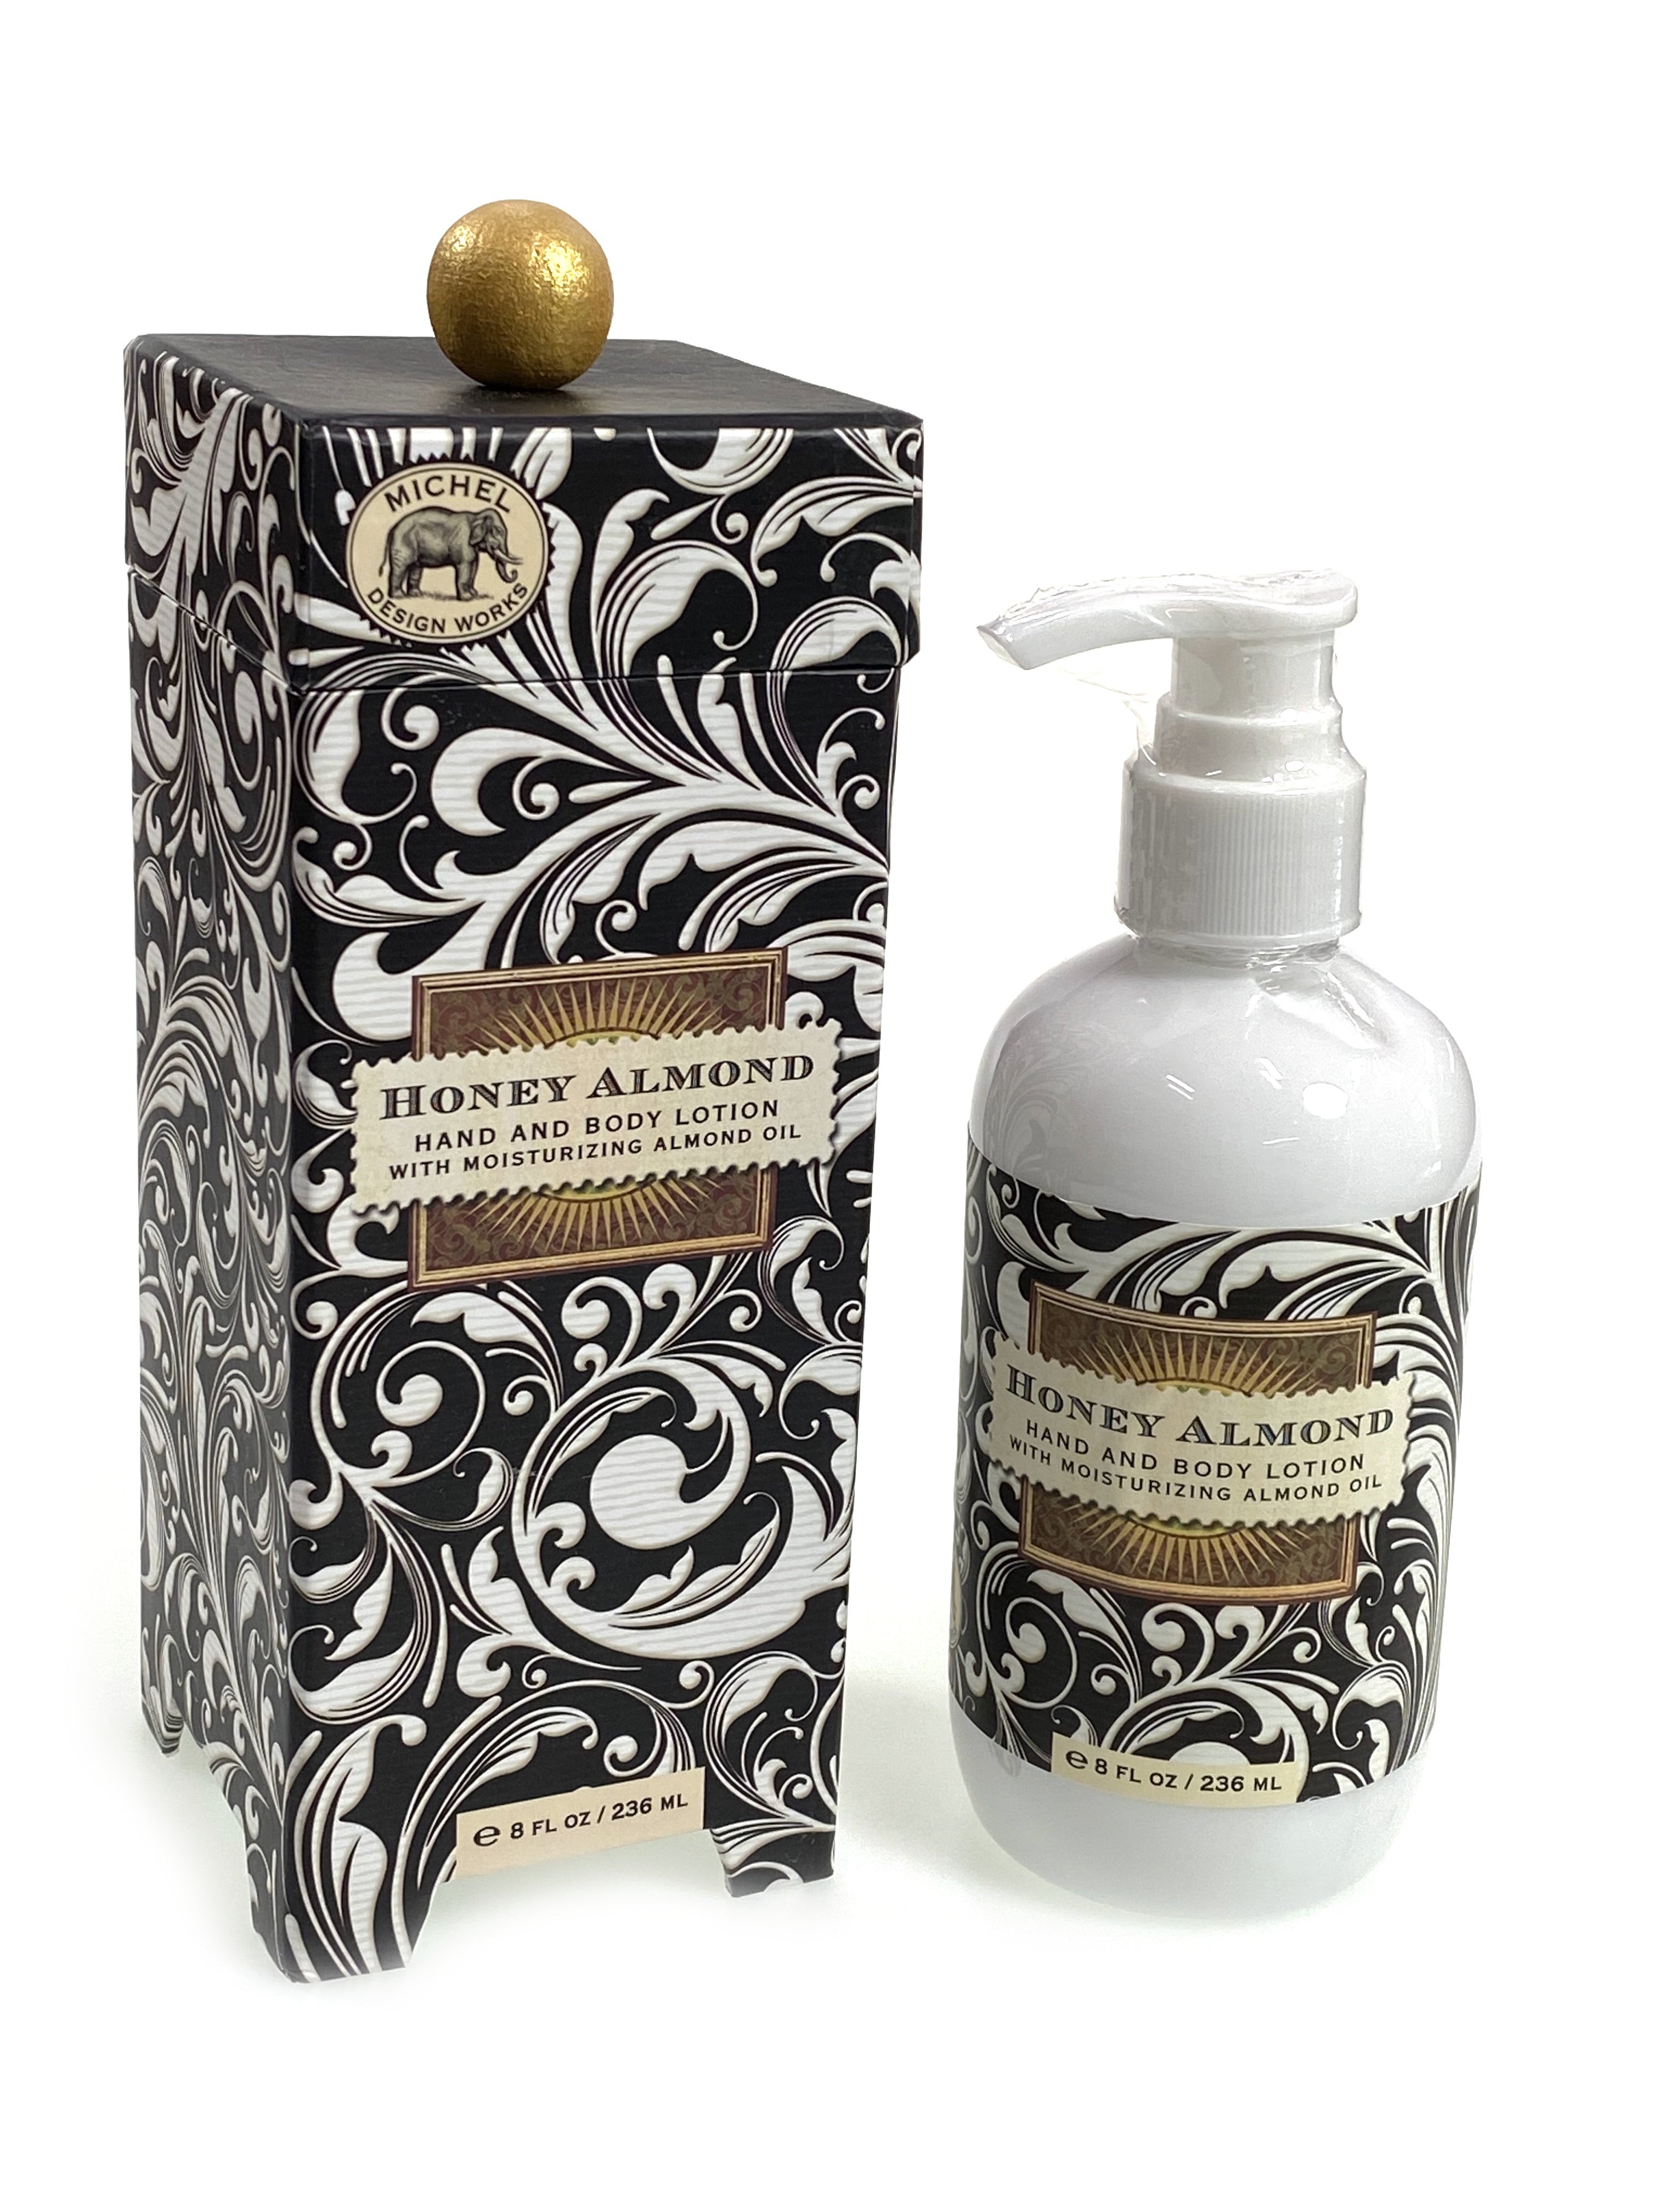 Honey Almond Hand and Body Lotion with Almond Oil    